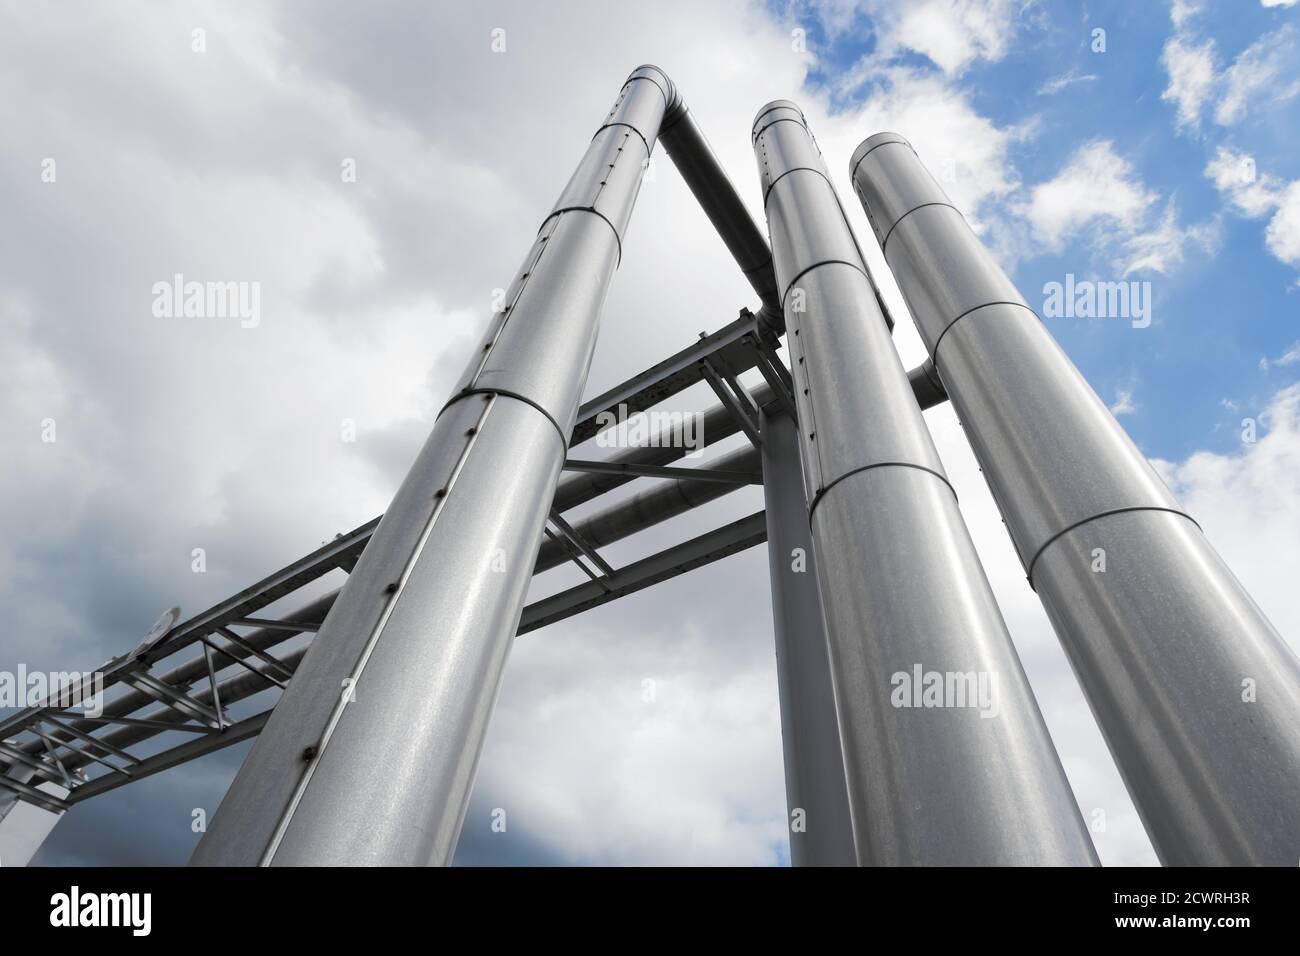 shiny industrial pipes under cloudy sky Stock Photo